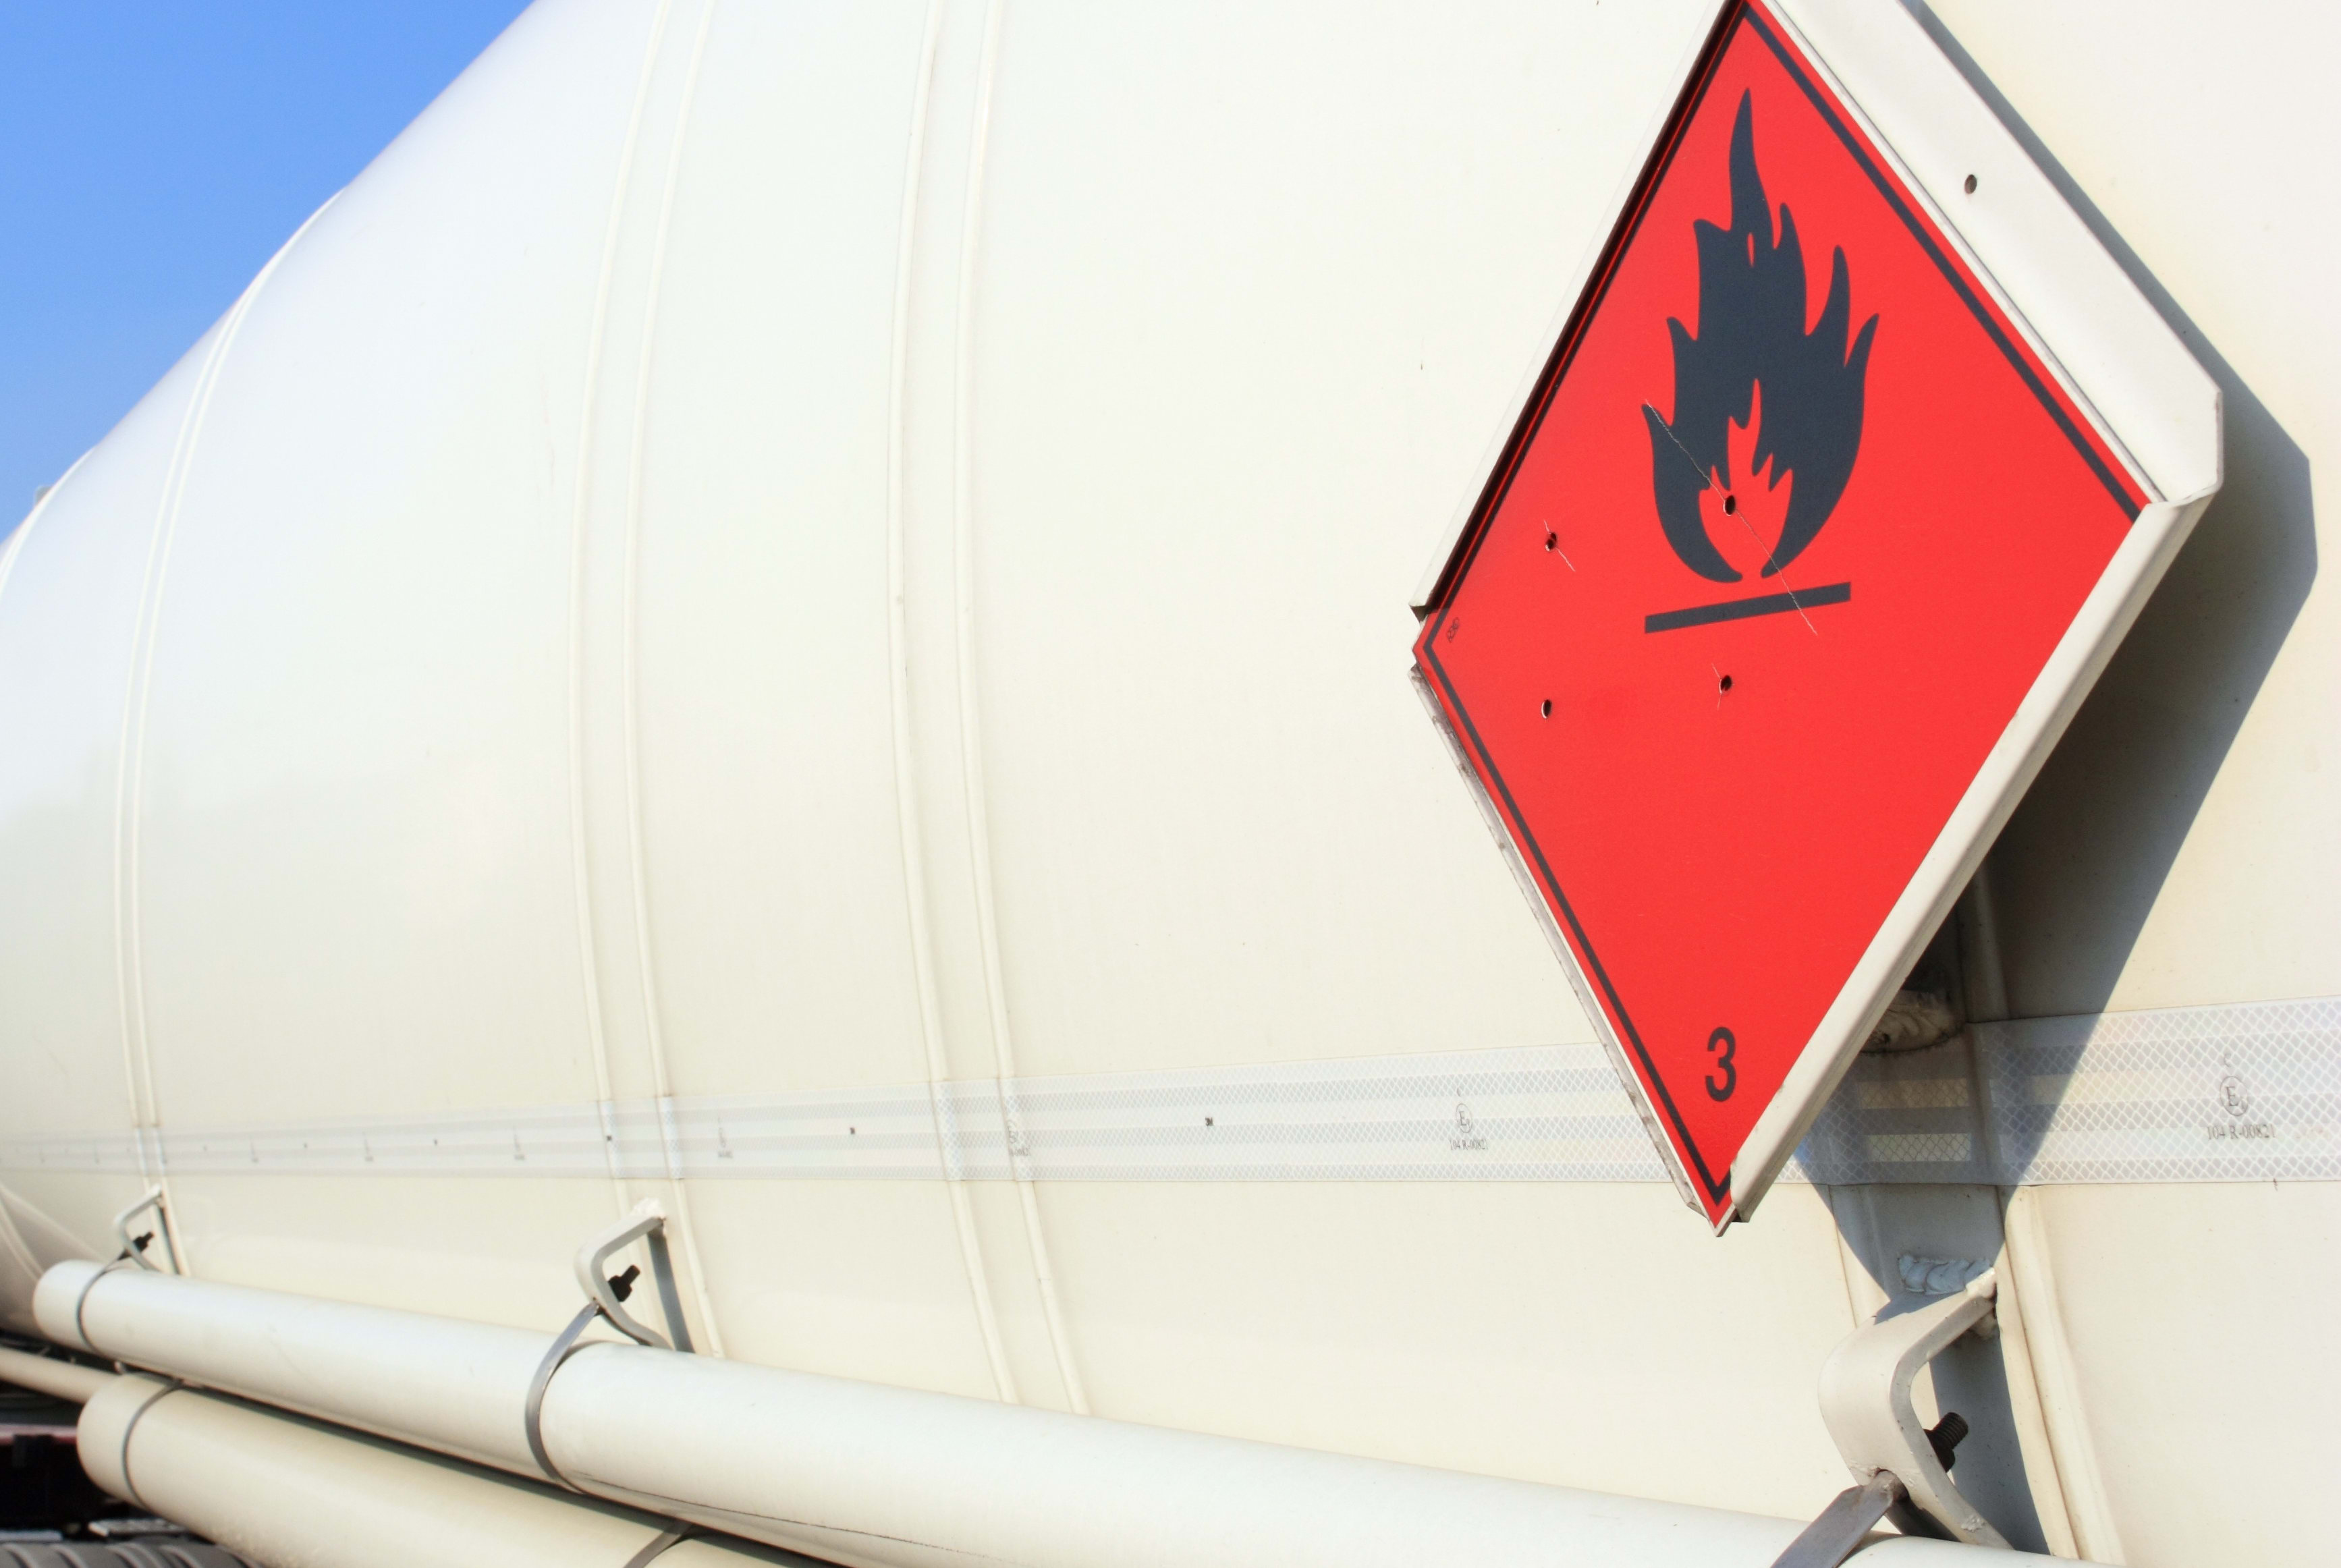 A fuel and flammable liquid tanker truck with a fire hazard warning sticker.